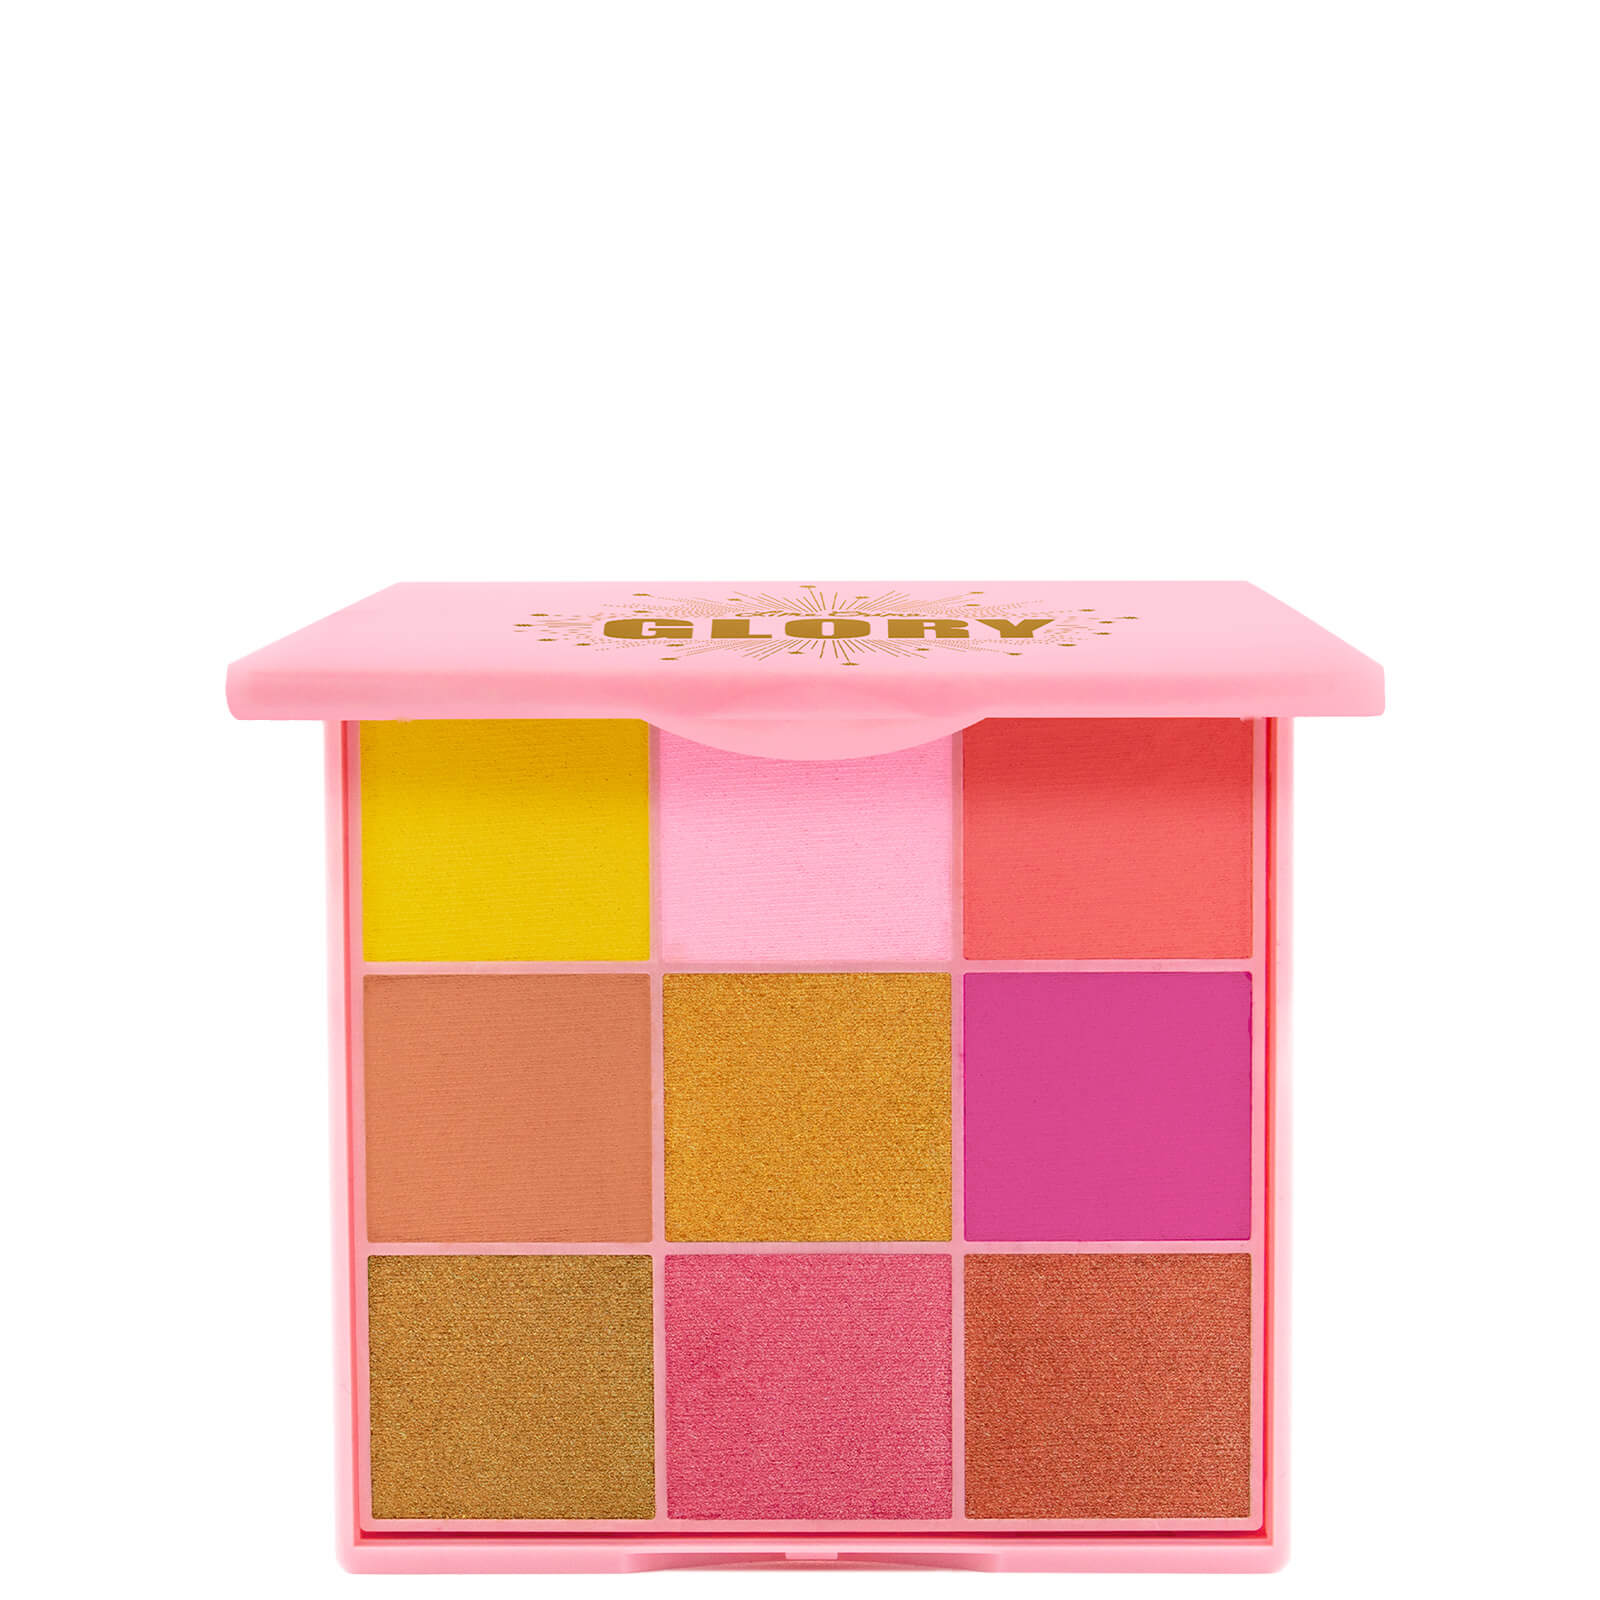 LIME CRIME GLORY EYE AND FACE PALETTE,L142-01-0001